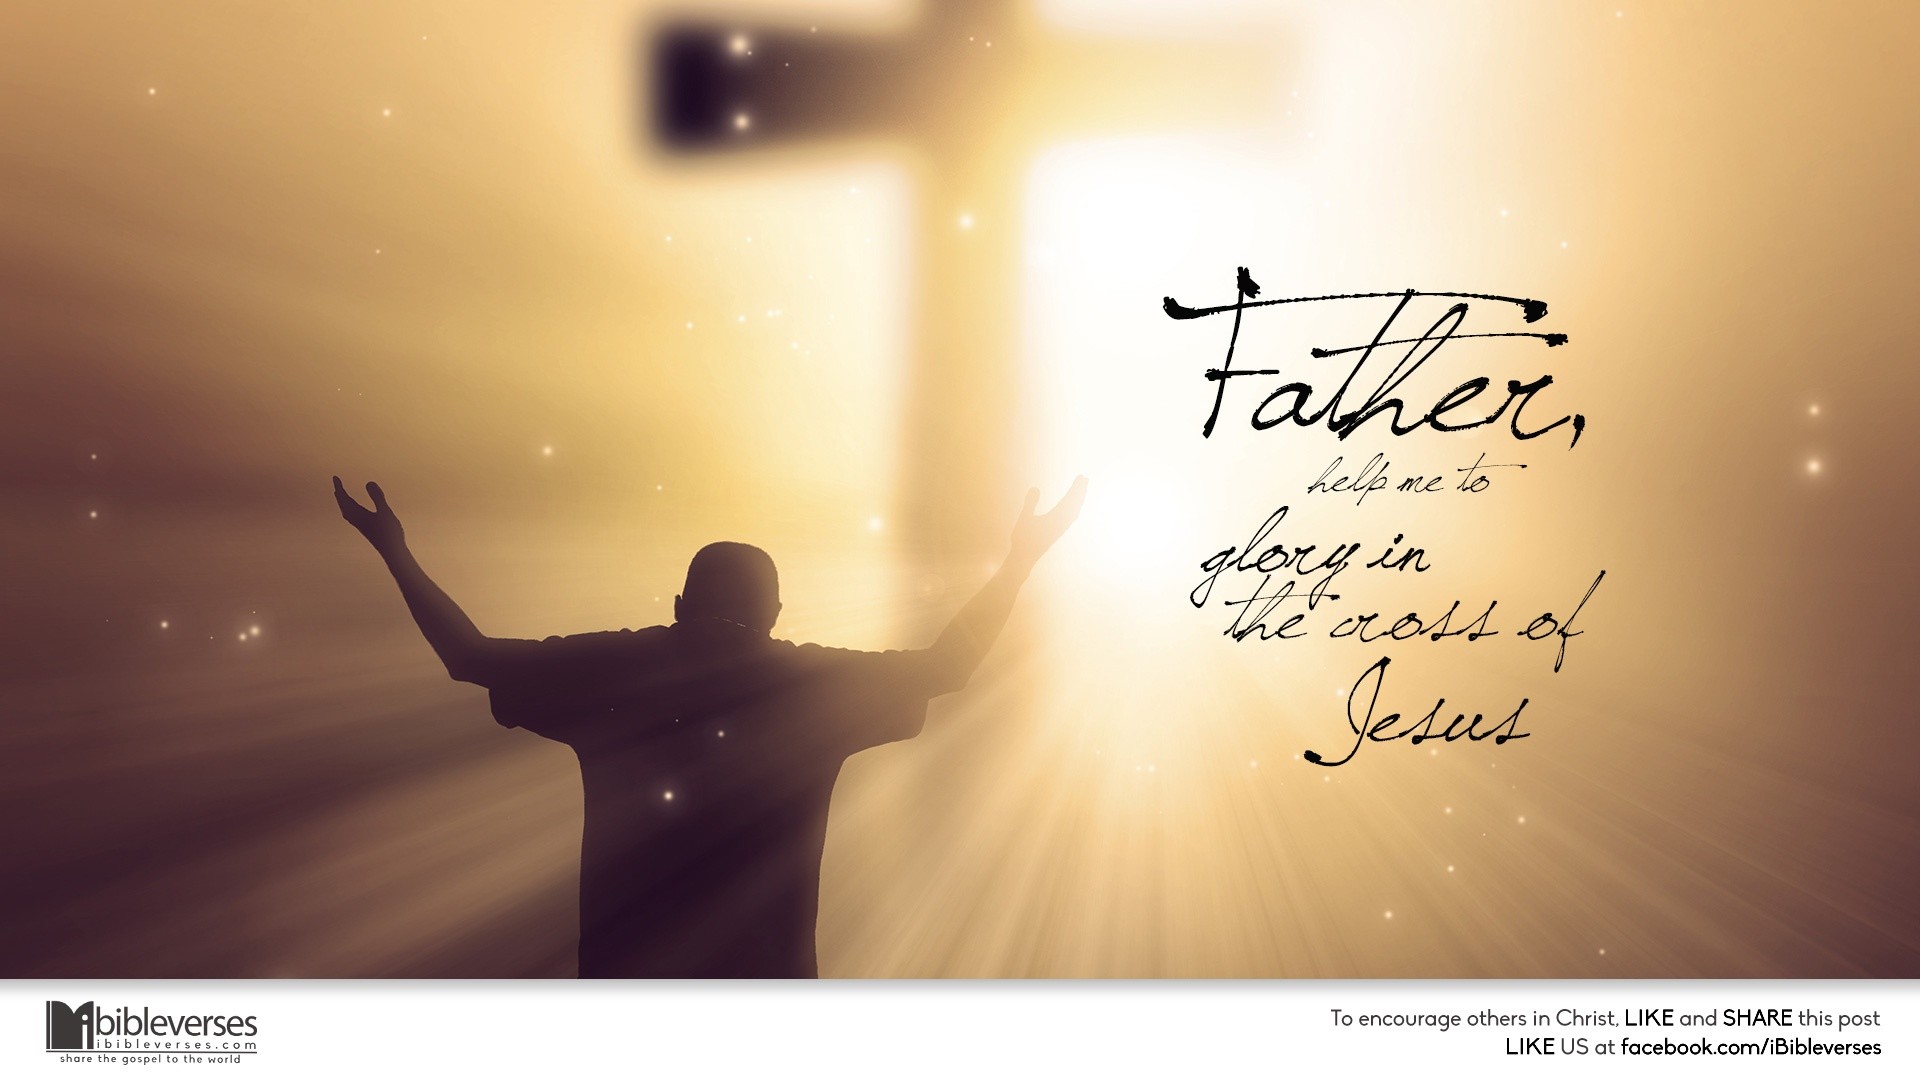 1920x1080 By ibibleversesbibleverses On May 1, 2014